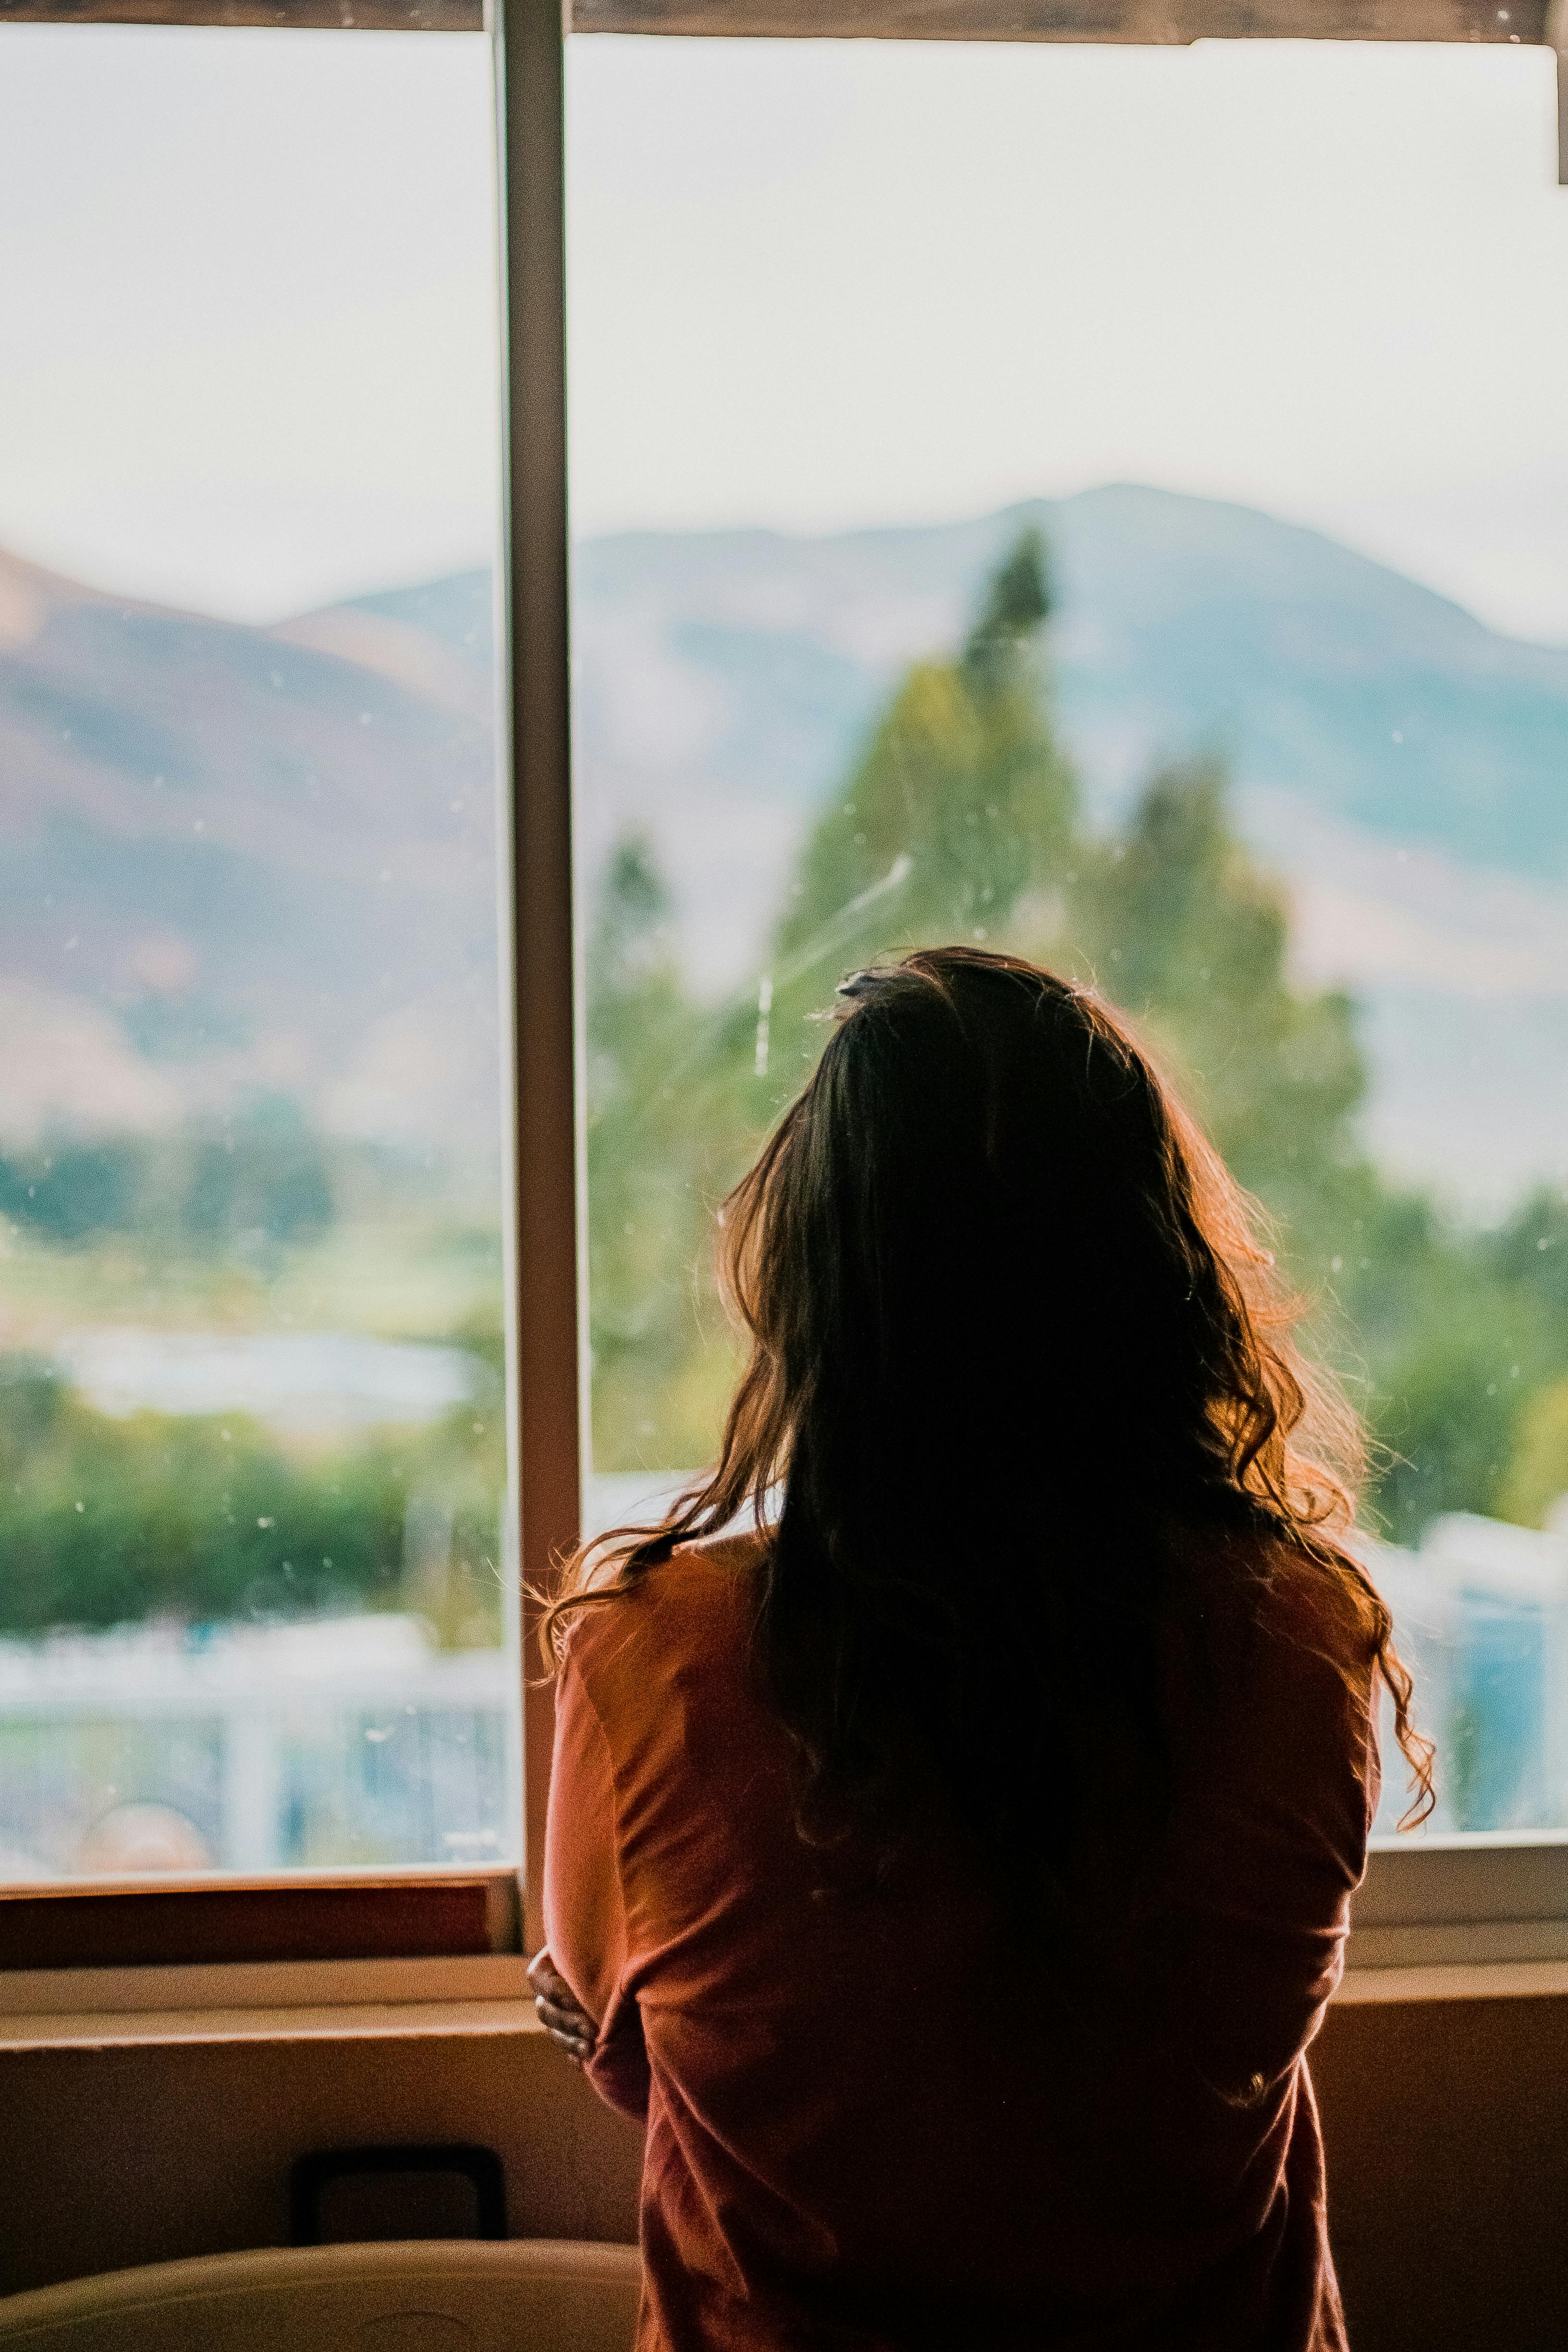 Woman looking out the window | Source: Pexels